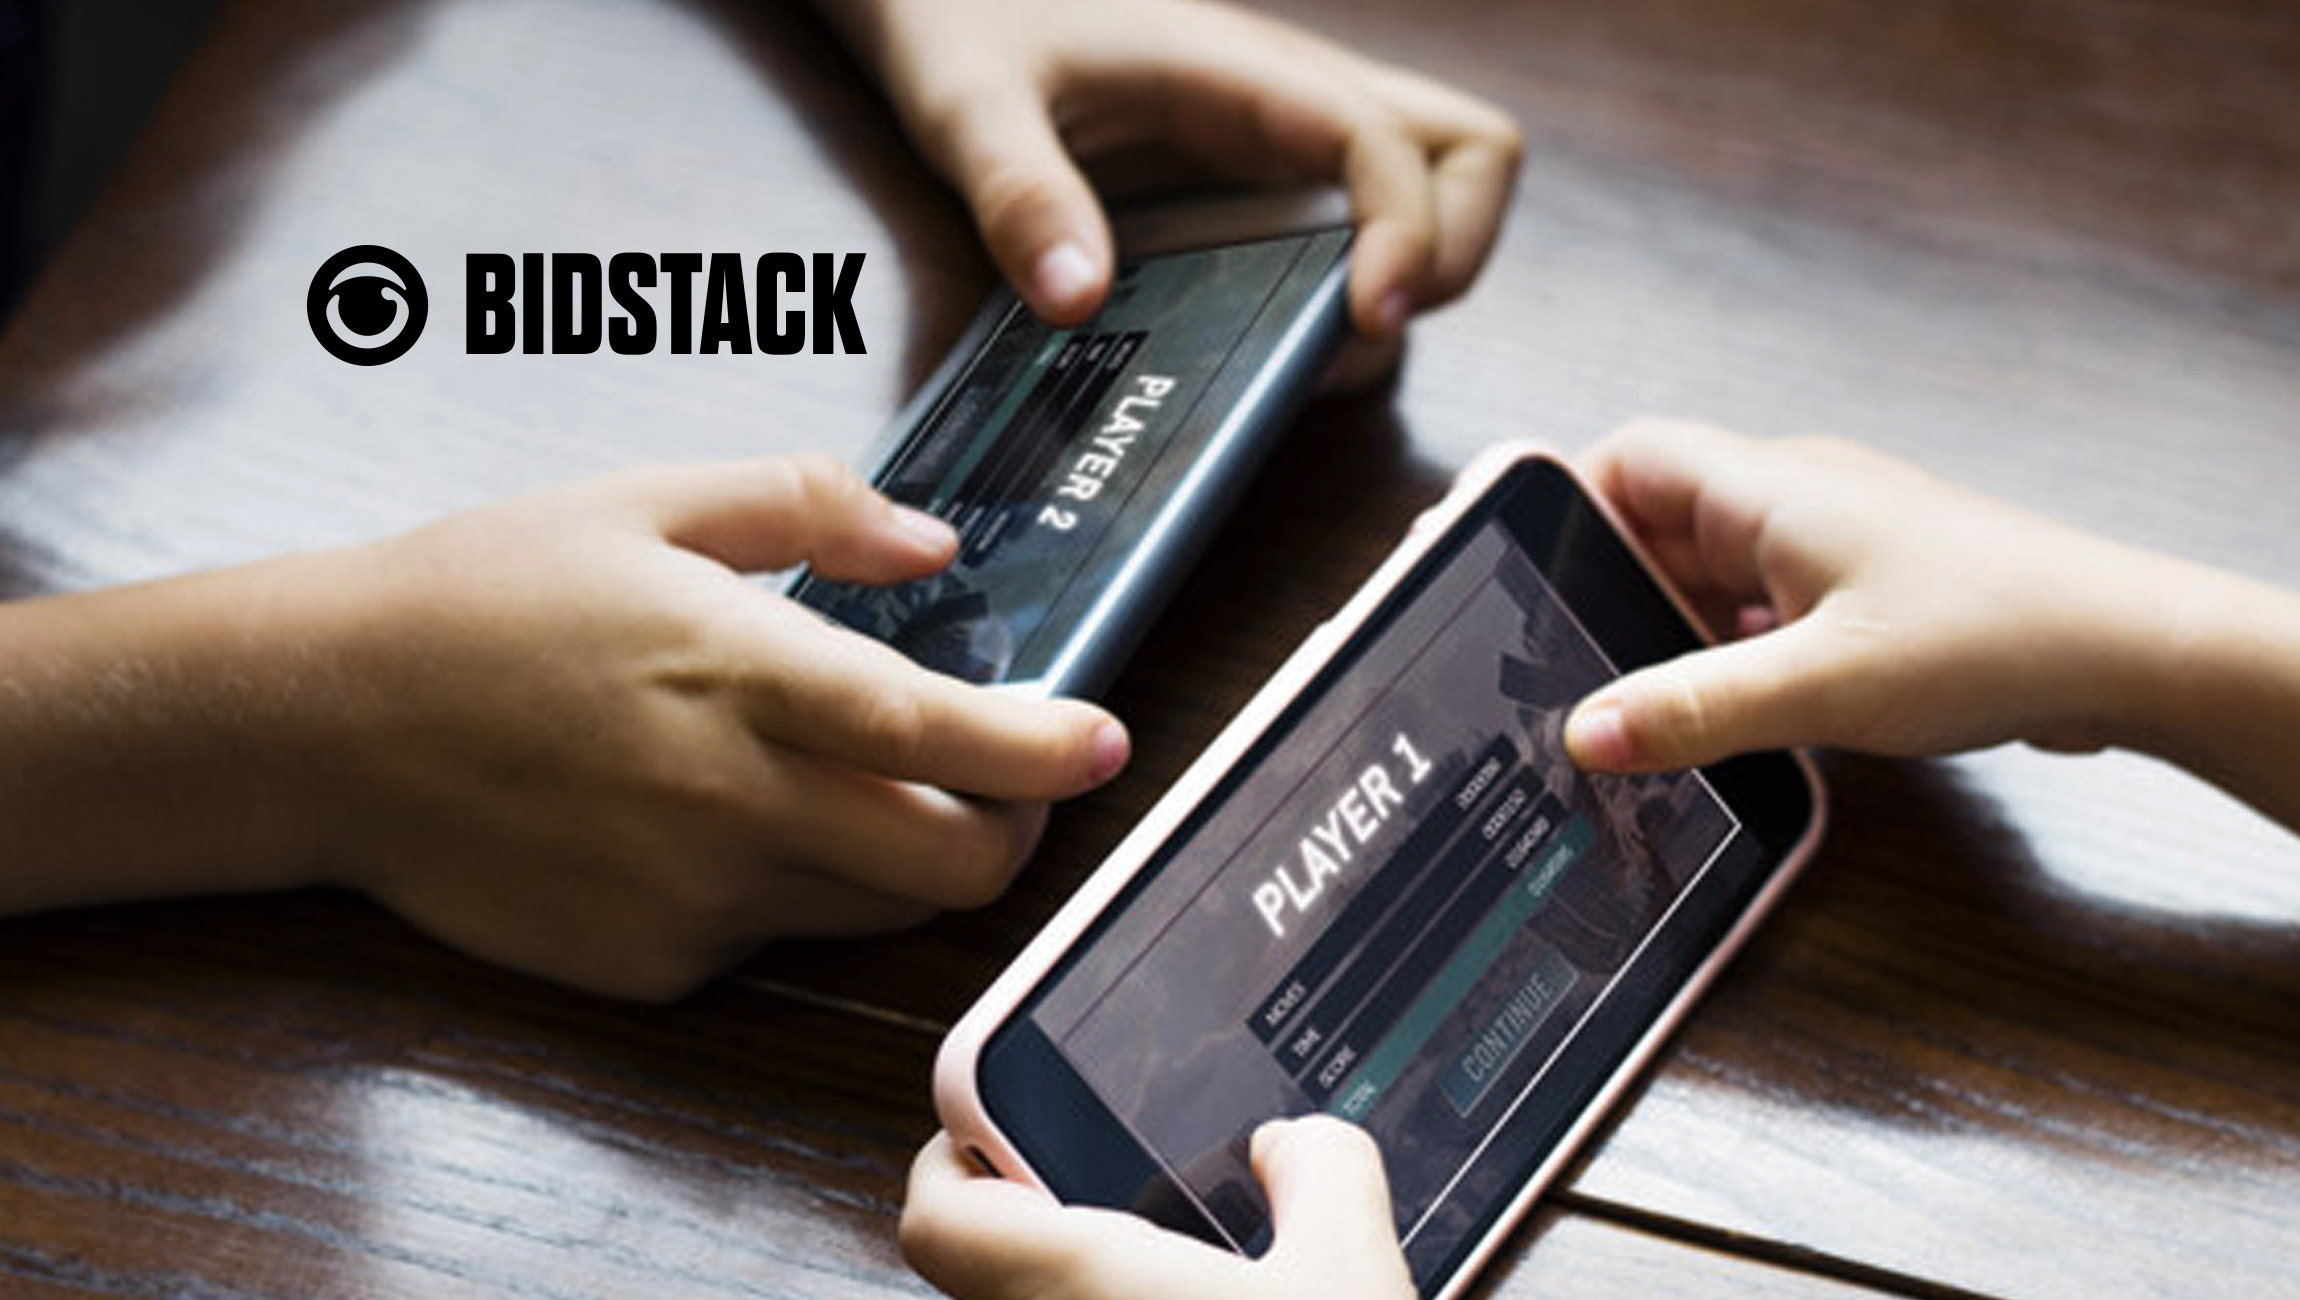 Bidstack Reaches New Checkpoint With Latest Senior Hires